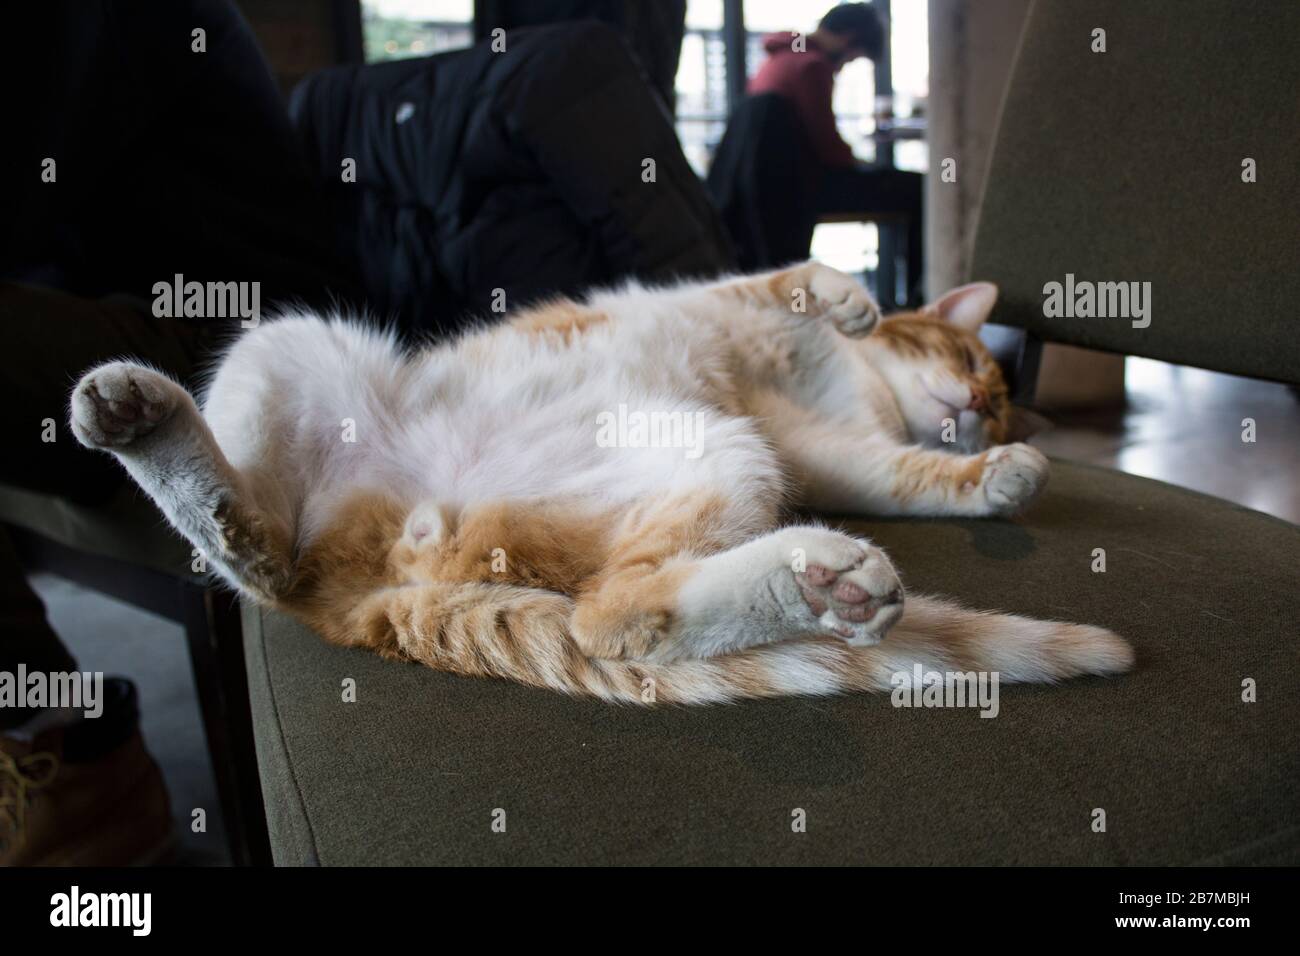 Close up full length portrait of a funny ginger cat asleep on a chair at a coffee shop. Stock Photo